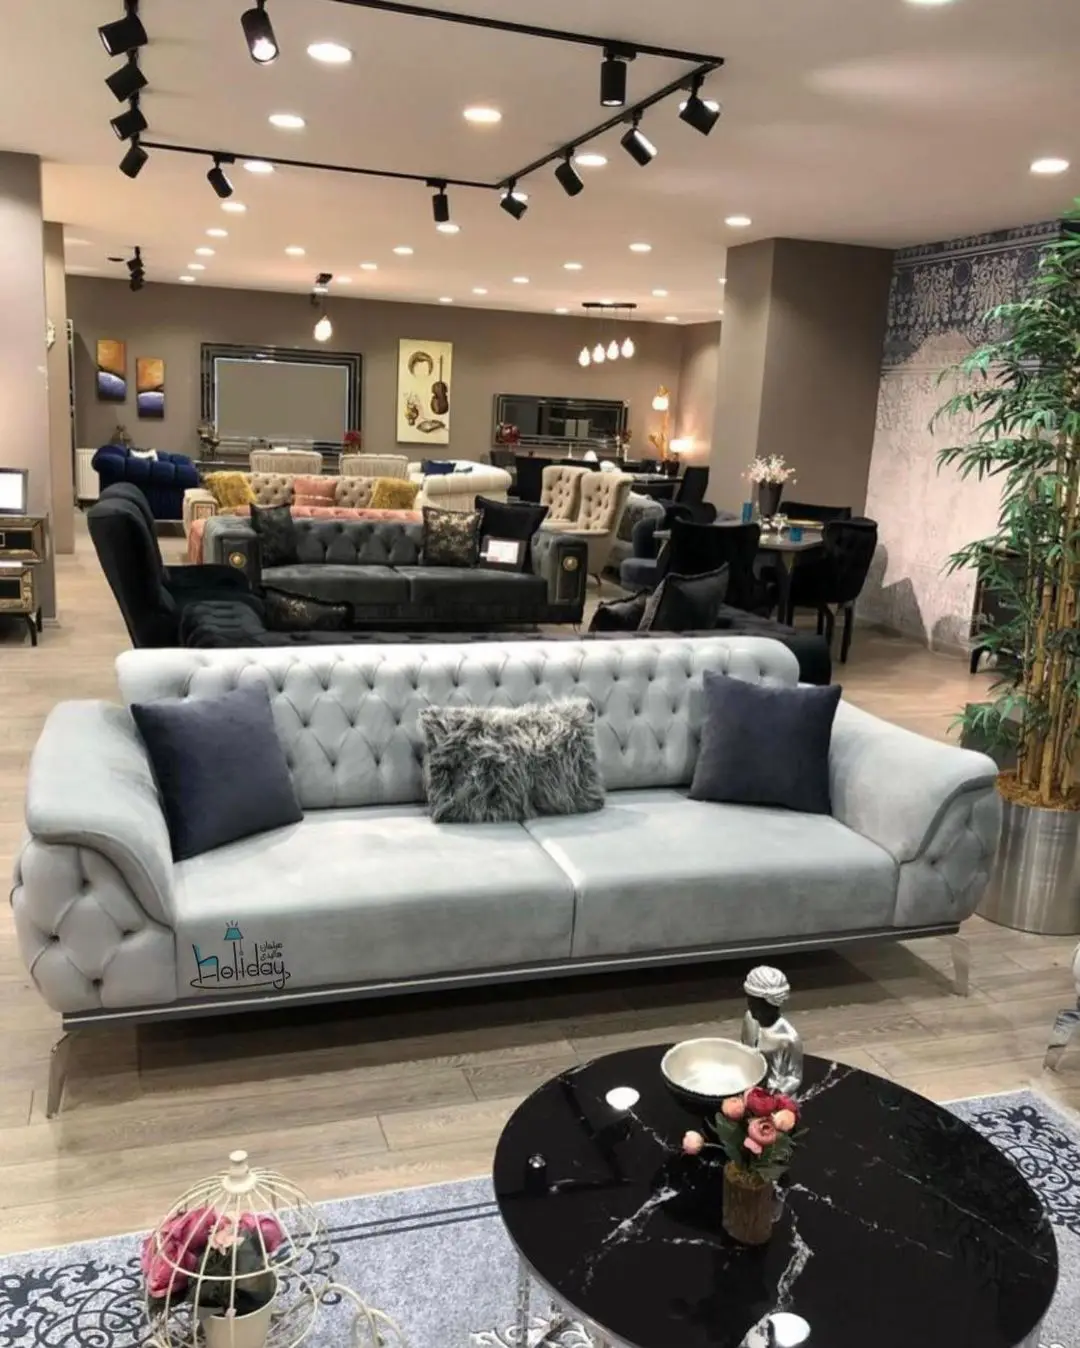 An example Patrice model of the holiday sofa in black and gray color Luxury design